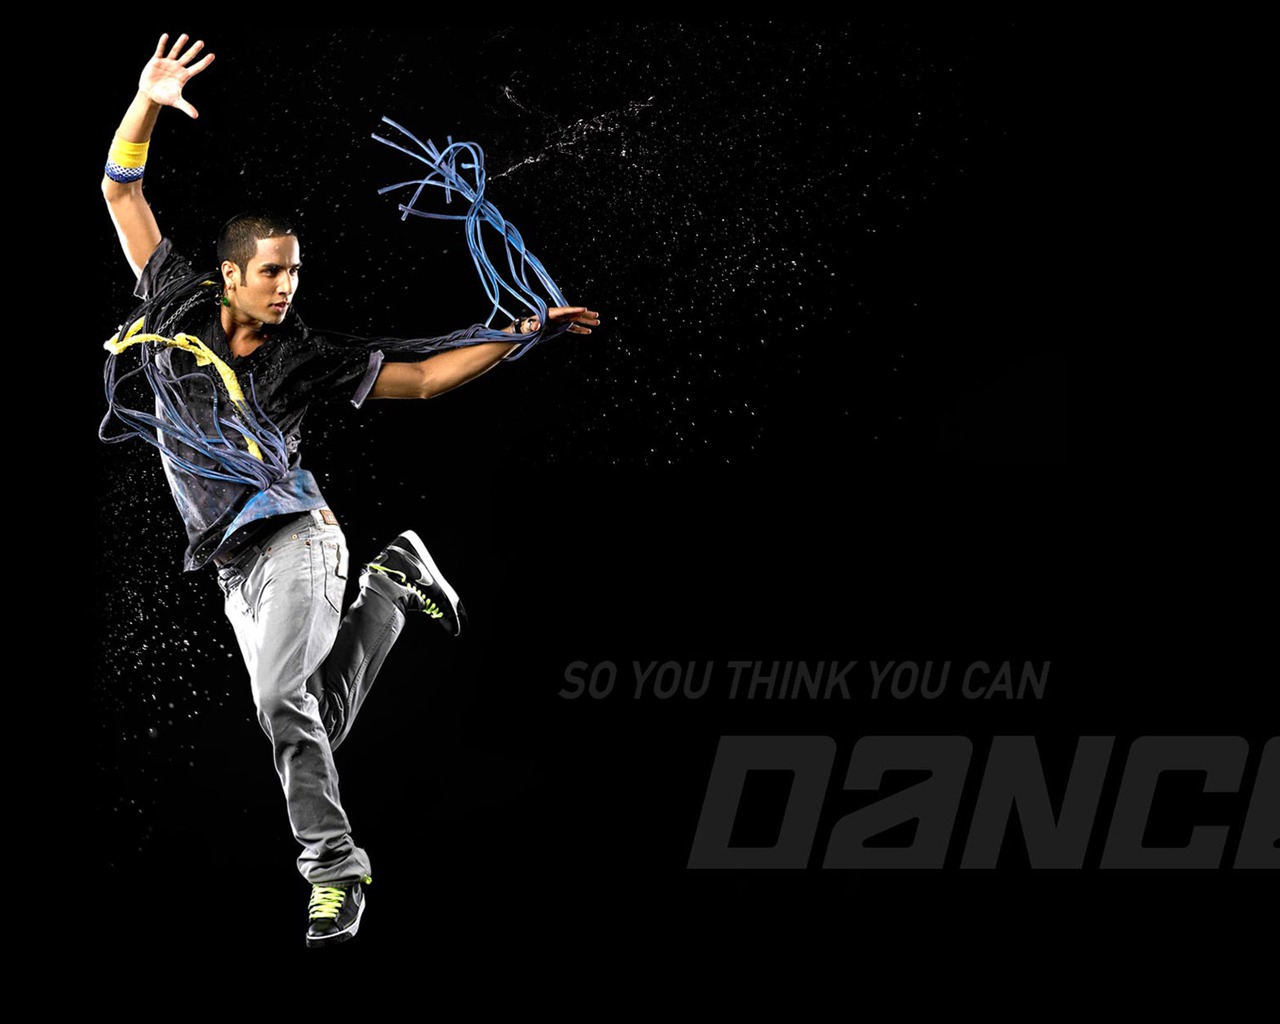 So You Think You Can Dance 舞林争霸 壁纸(一)4 - 1280x1024